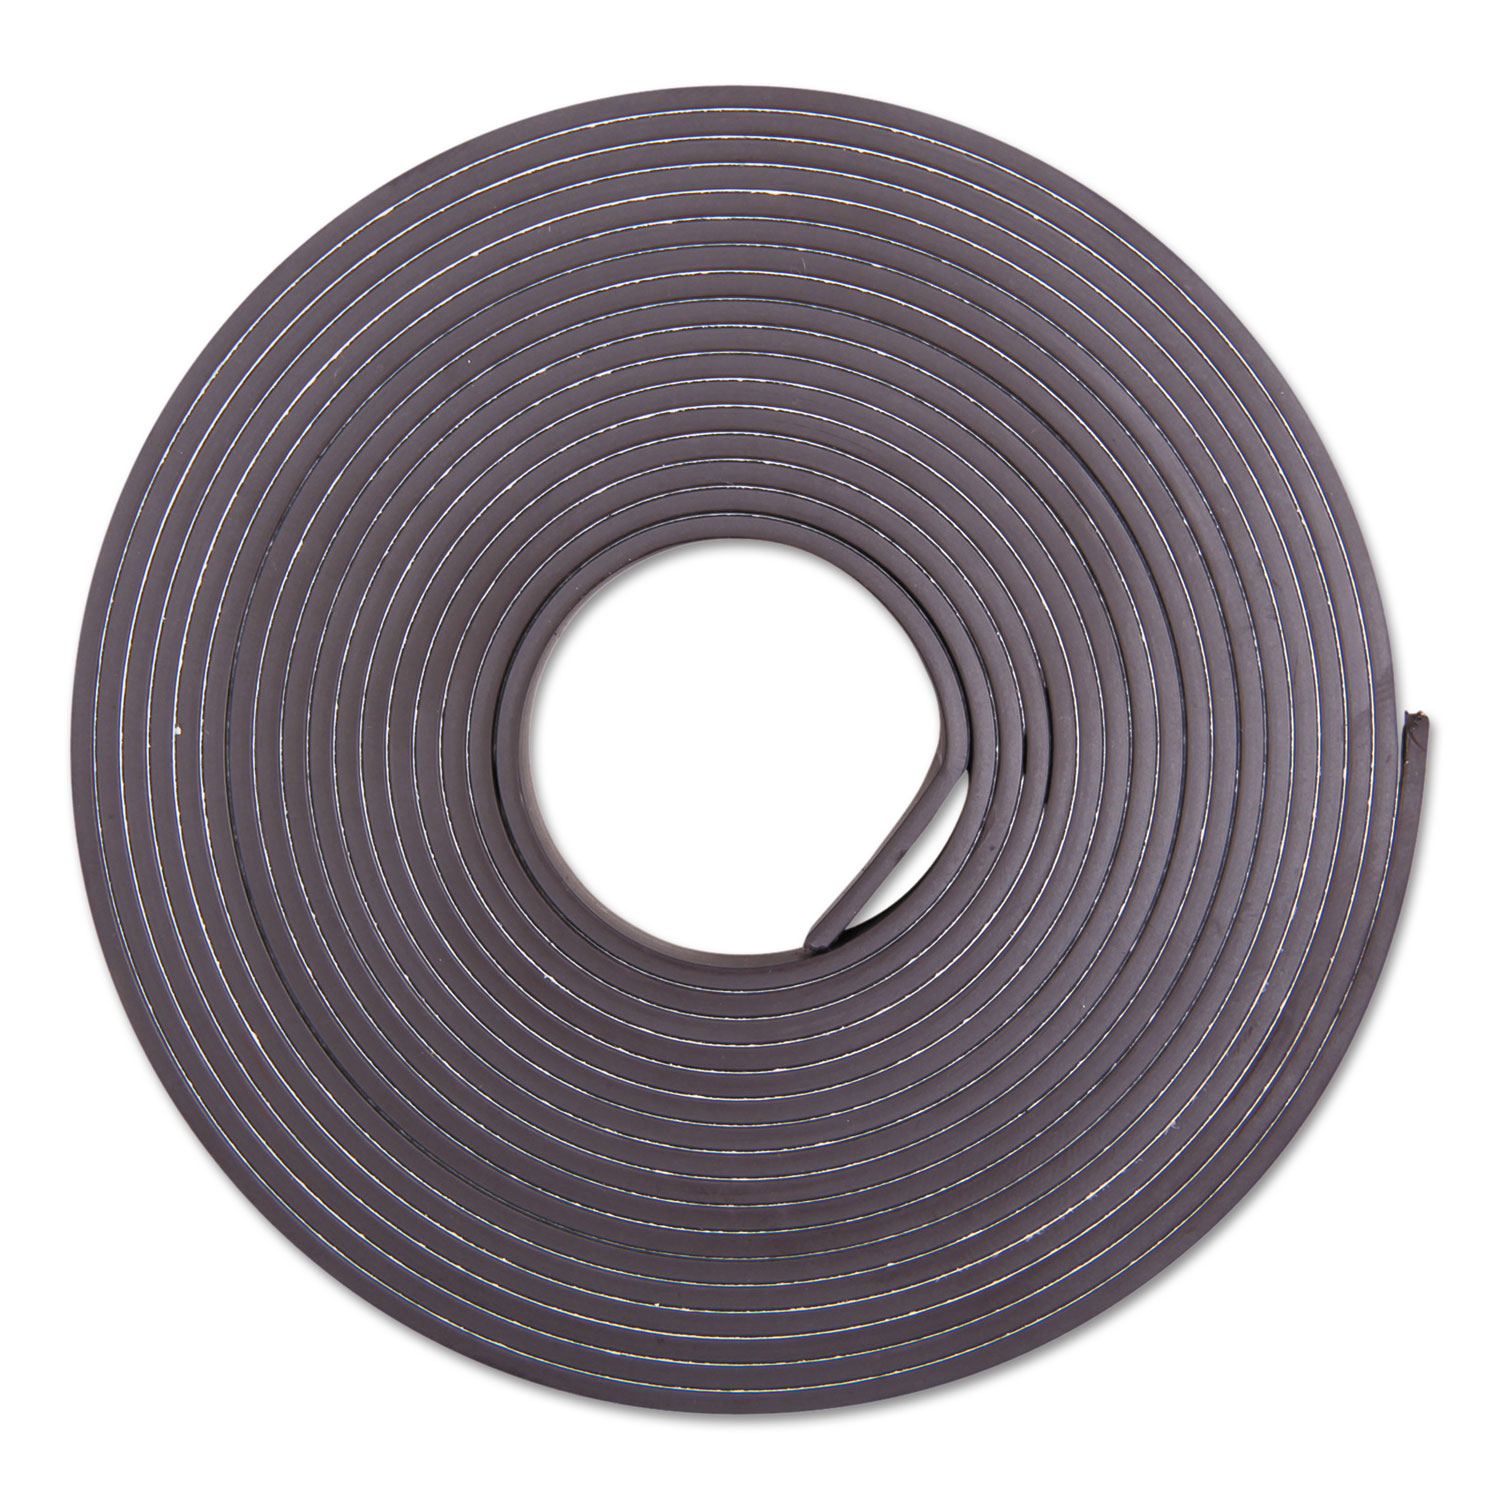 Adhesive-Backed Magnetic Tape, Black, 1/2" x 10ft, Roll